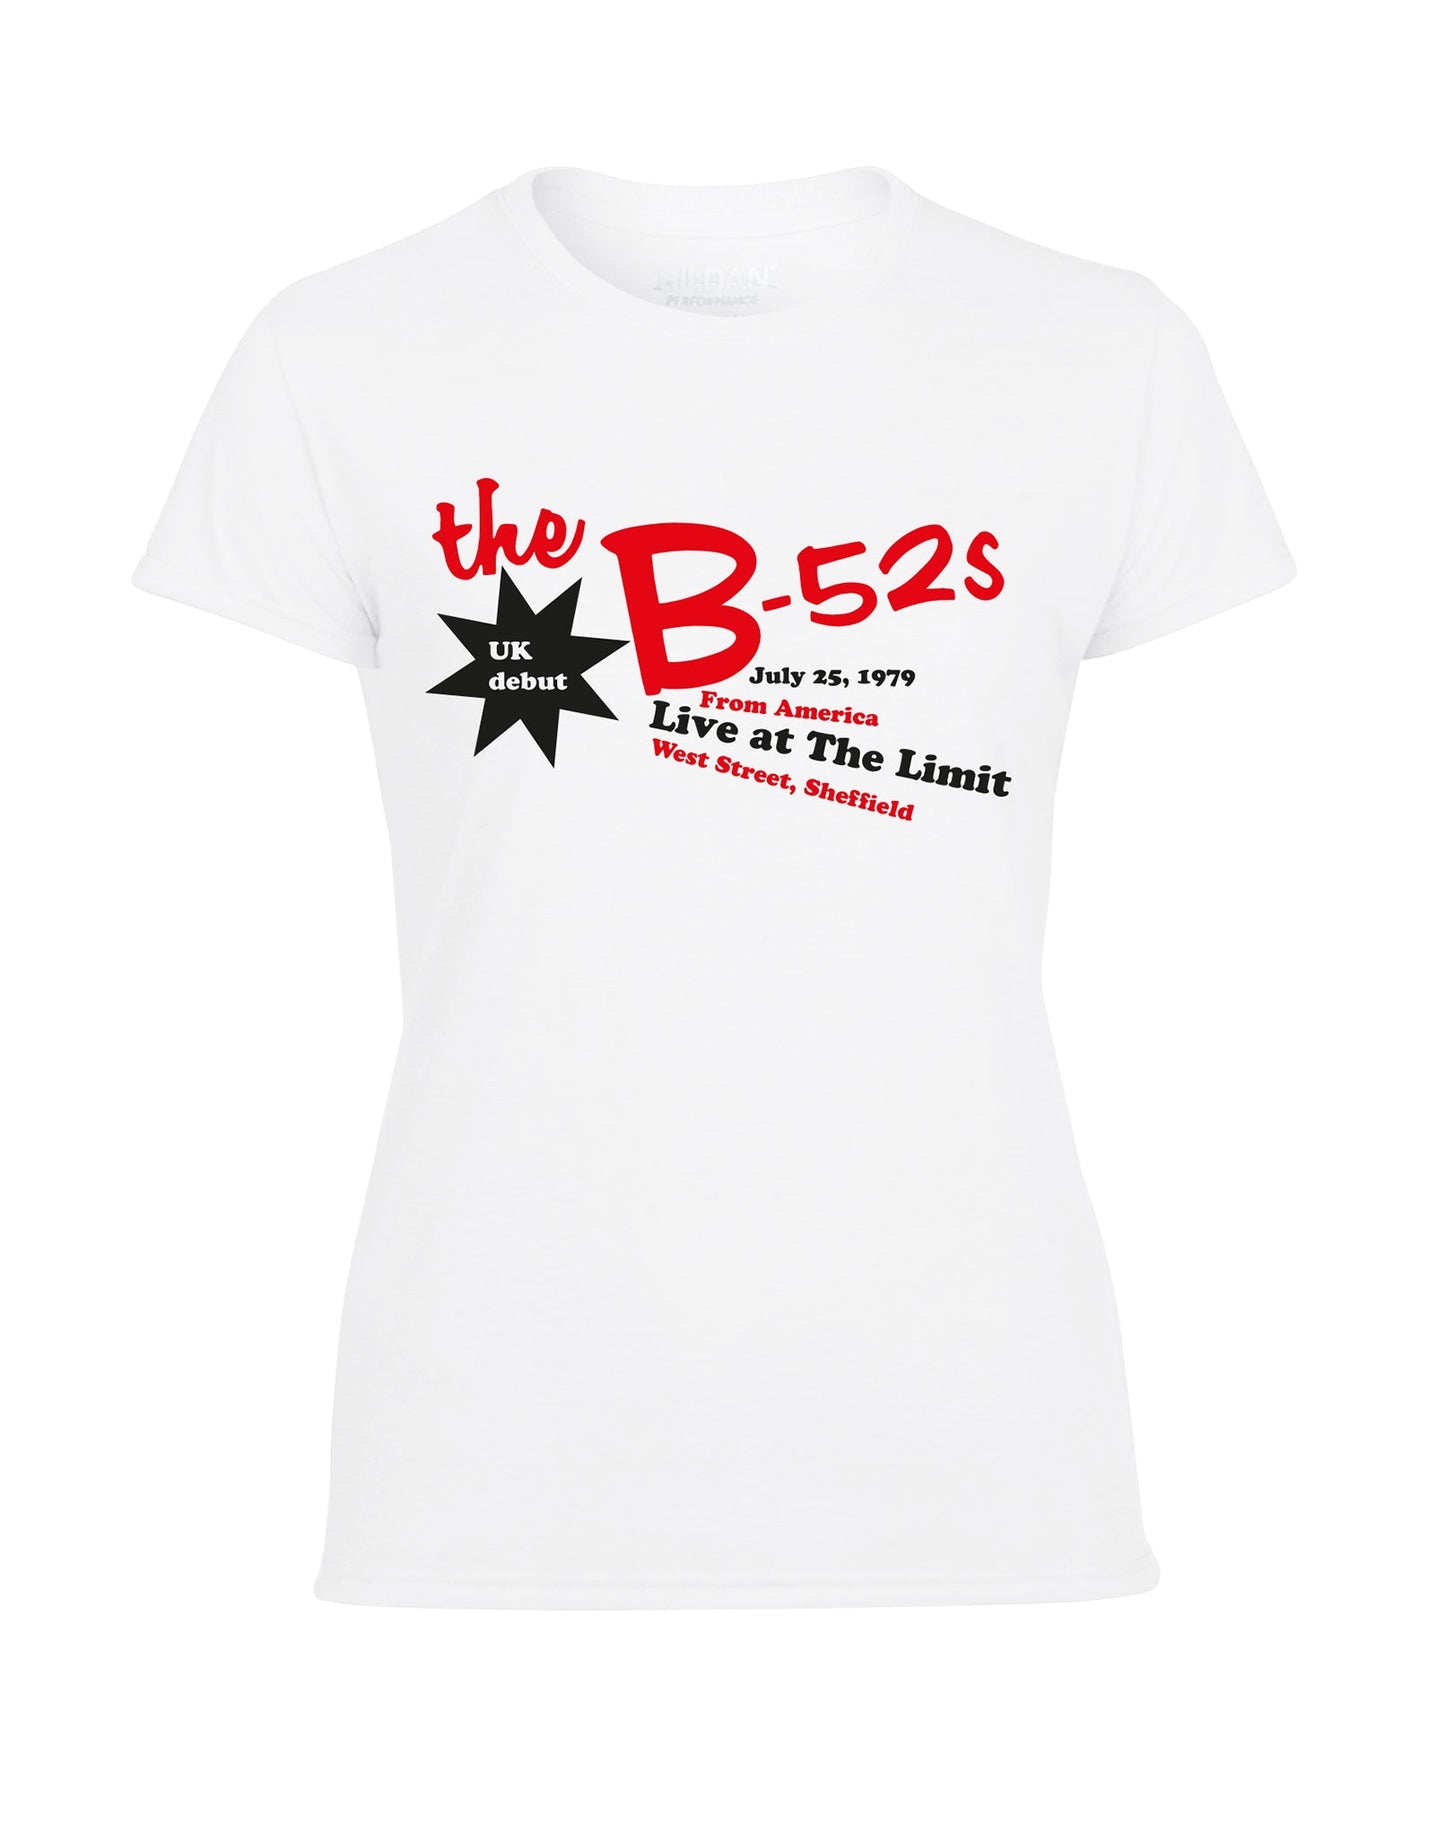 B-52's at the Limit ladies fit t-shirt- various colours - Dirty Stop Outs